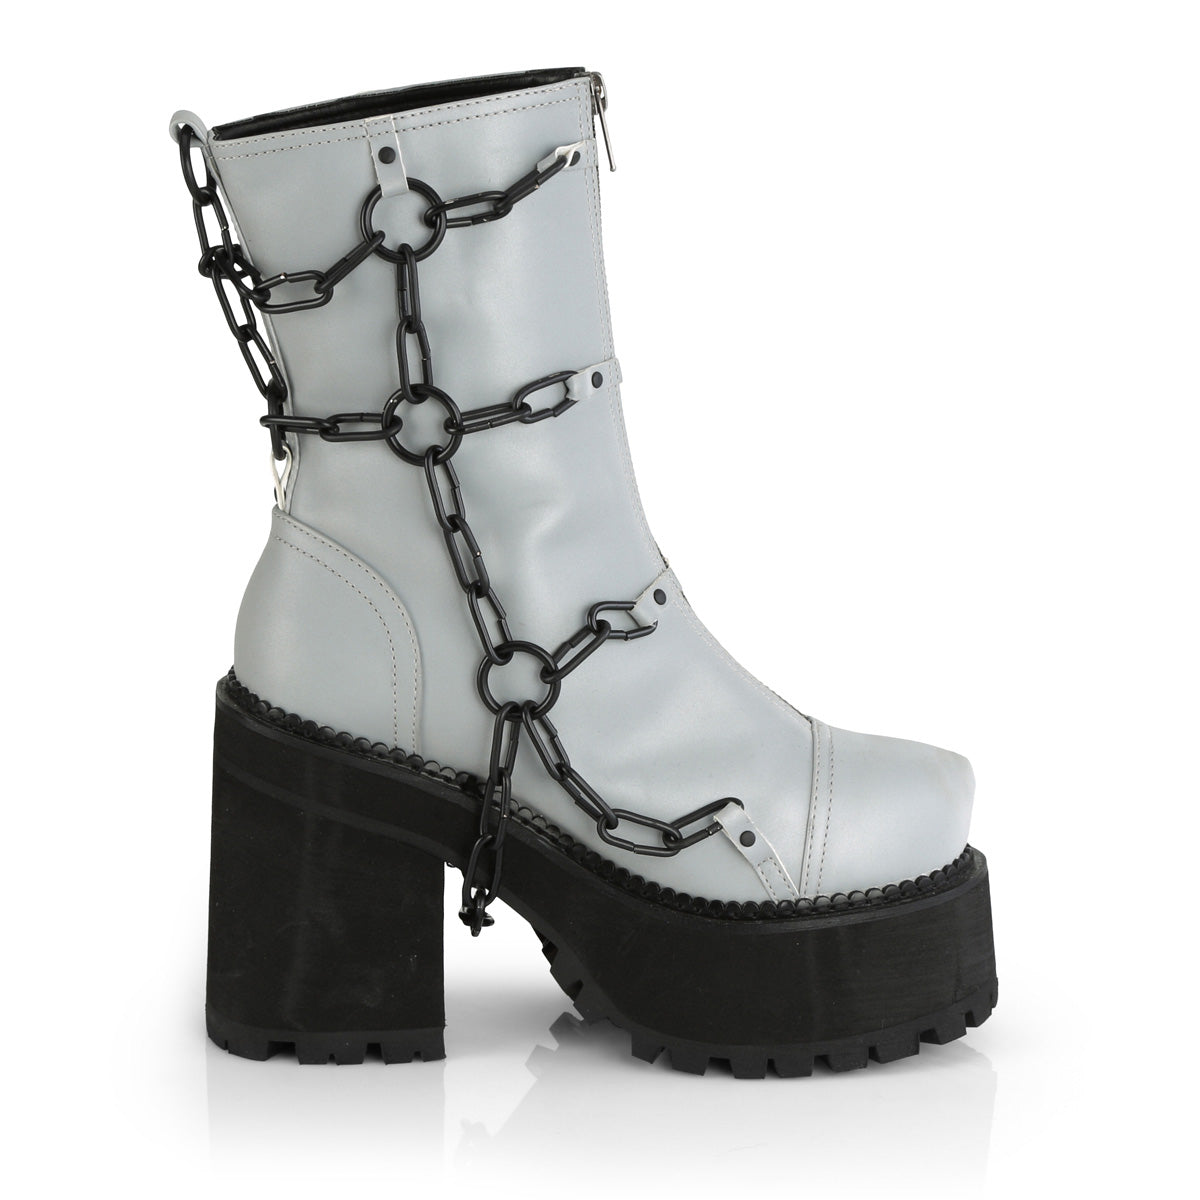 DemoniaCult Womens Ankle Boots ASSAULT-66 Grey Reflective Vegan Leather